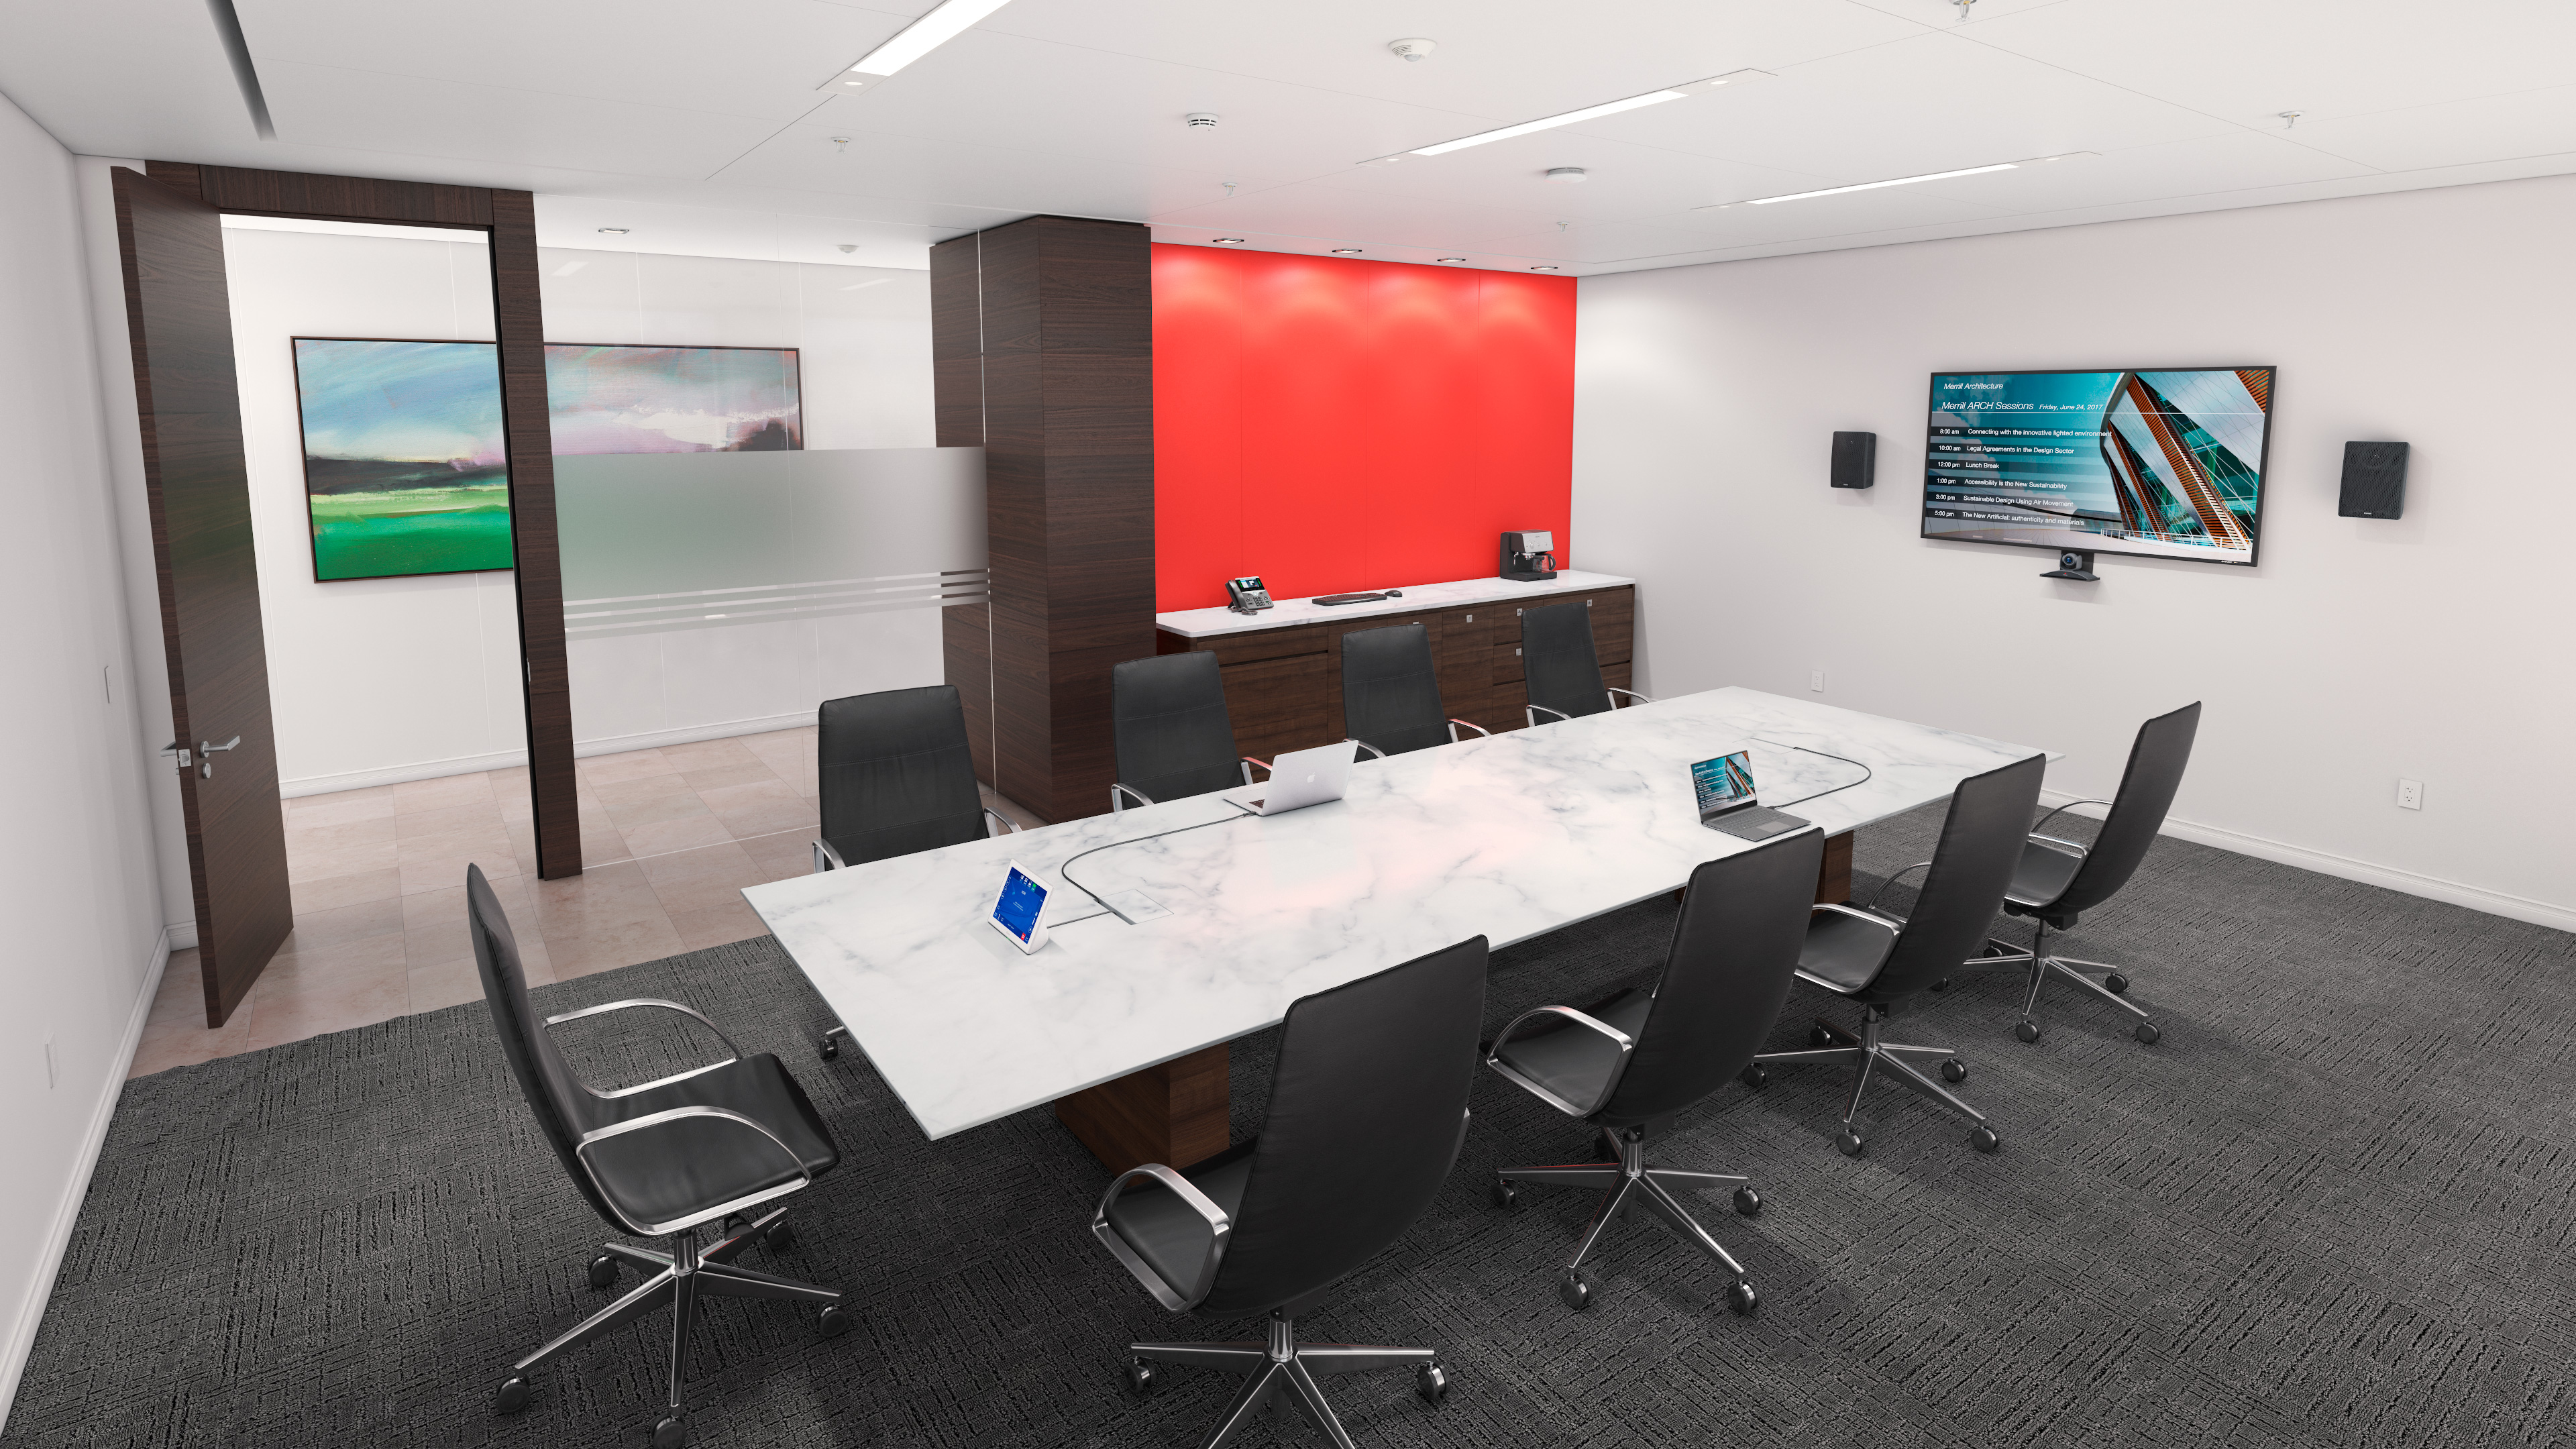 Cable Cubby 1252 MS creates a transition-free, nearly invisible appearance when closed, complementing any high end boardroom or meeting room furniture